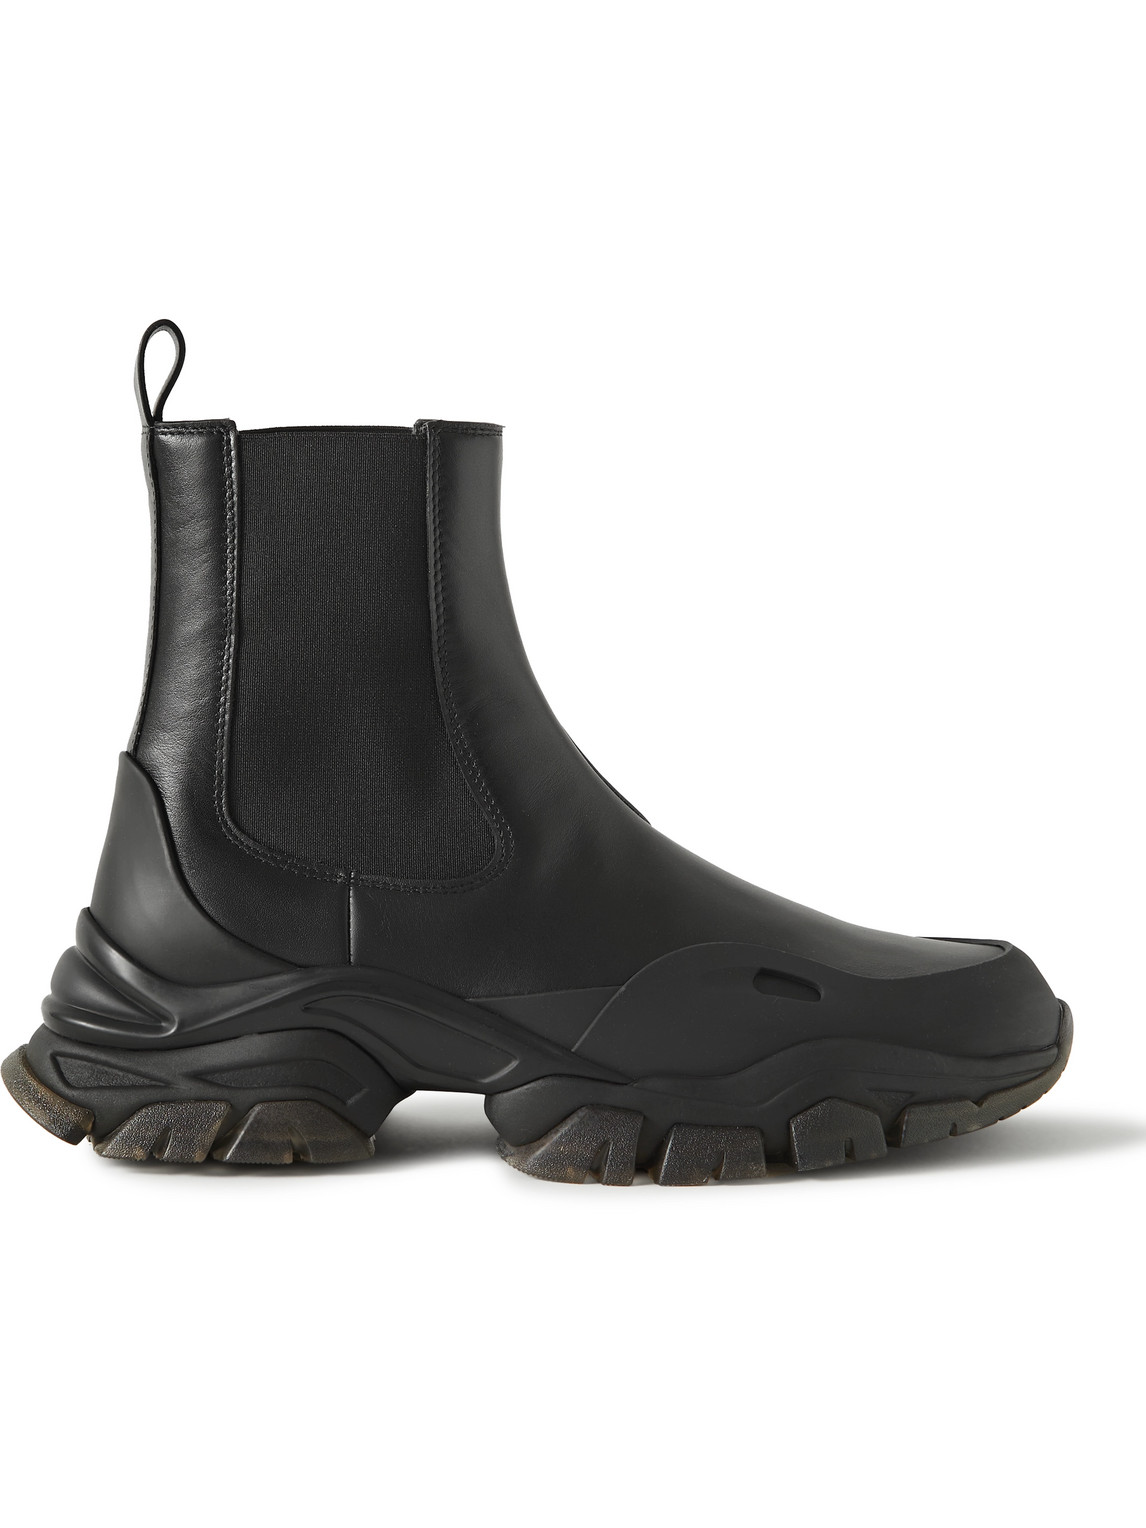 MONCLER GENIUS 6 MONCLER 1017 ALYX 9SM ARY RUBBER-TRIMMED LEATHER CHELSEA BOOTS